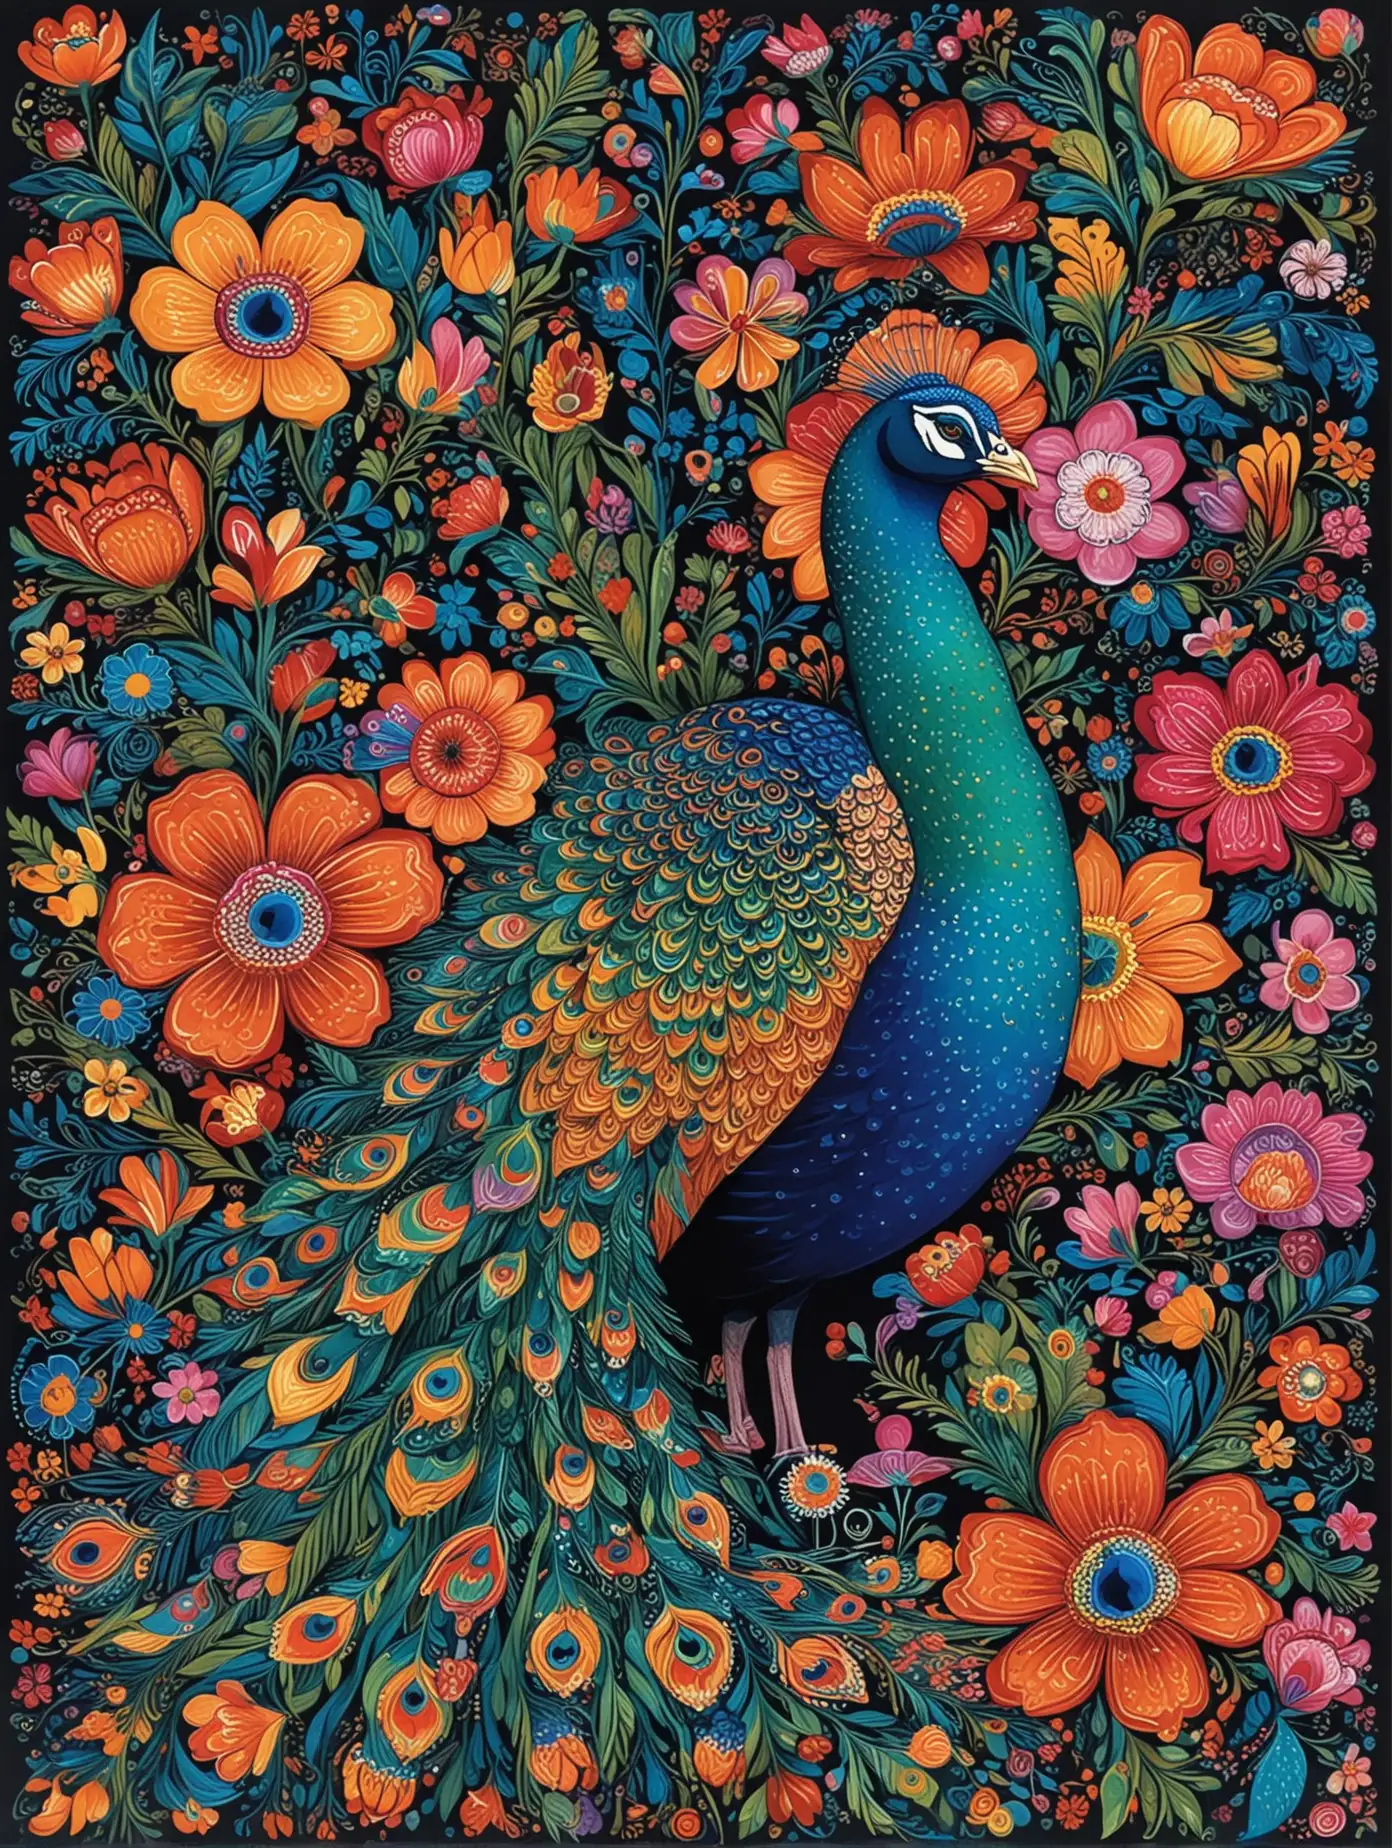 Vibrant Peacock with Traditional Folk Art Flowers